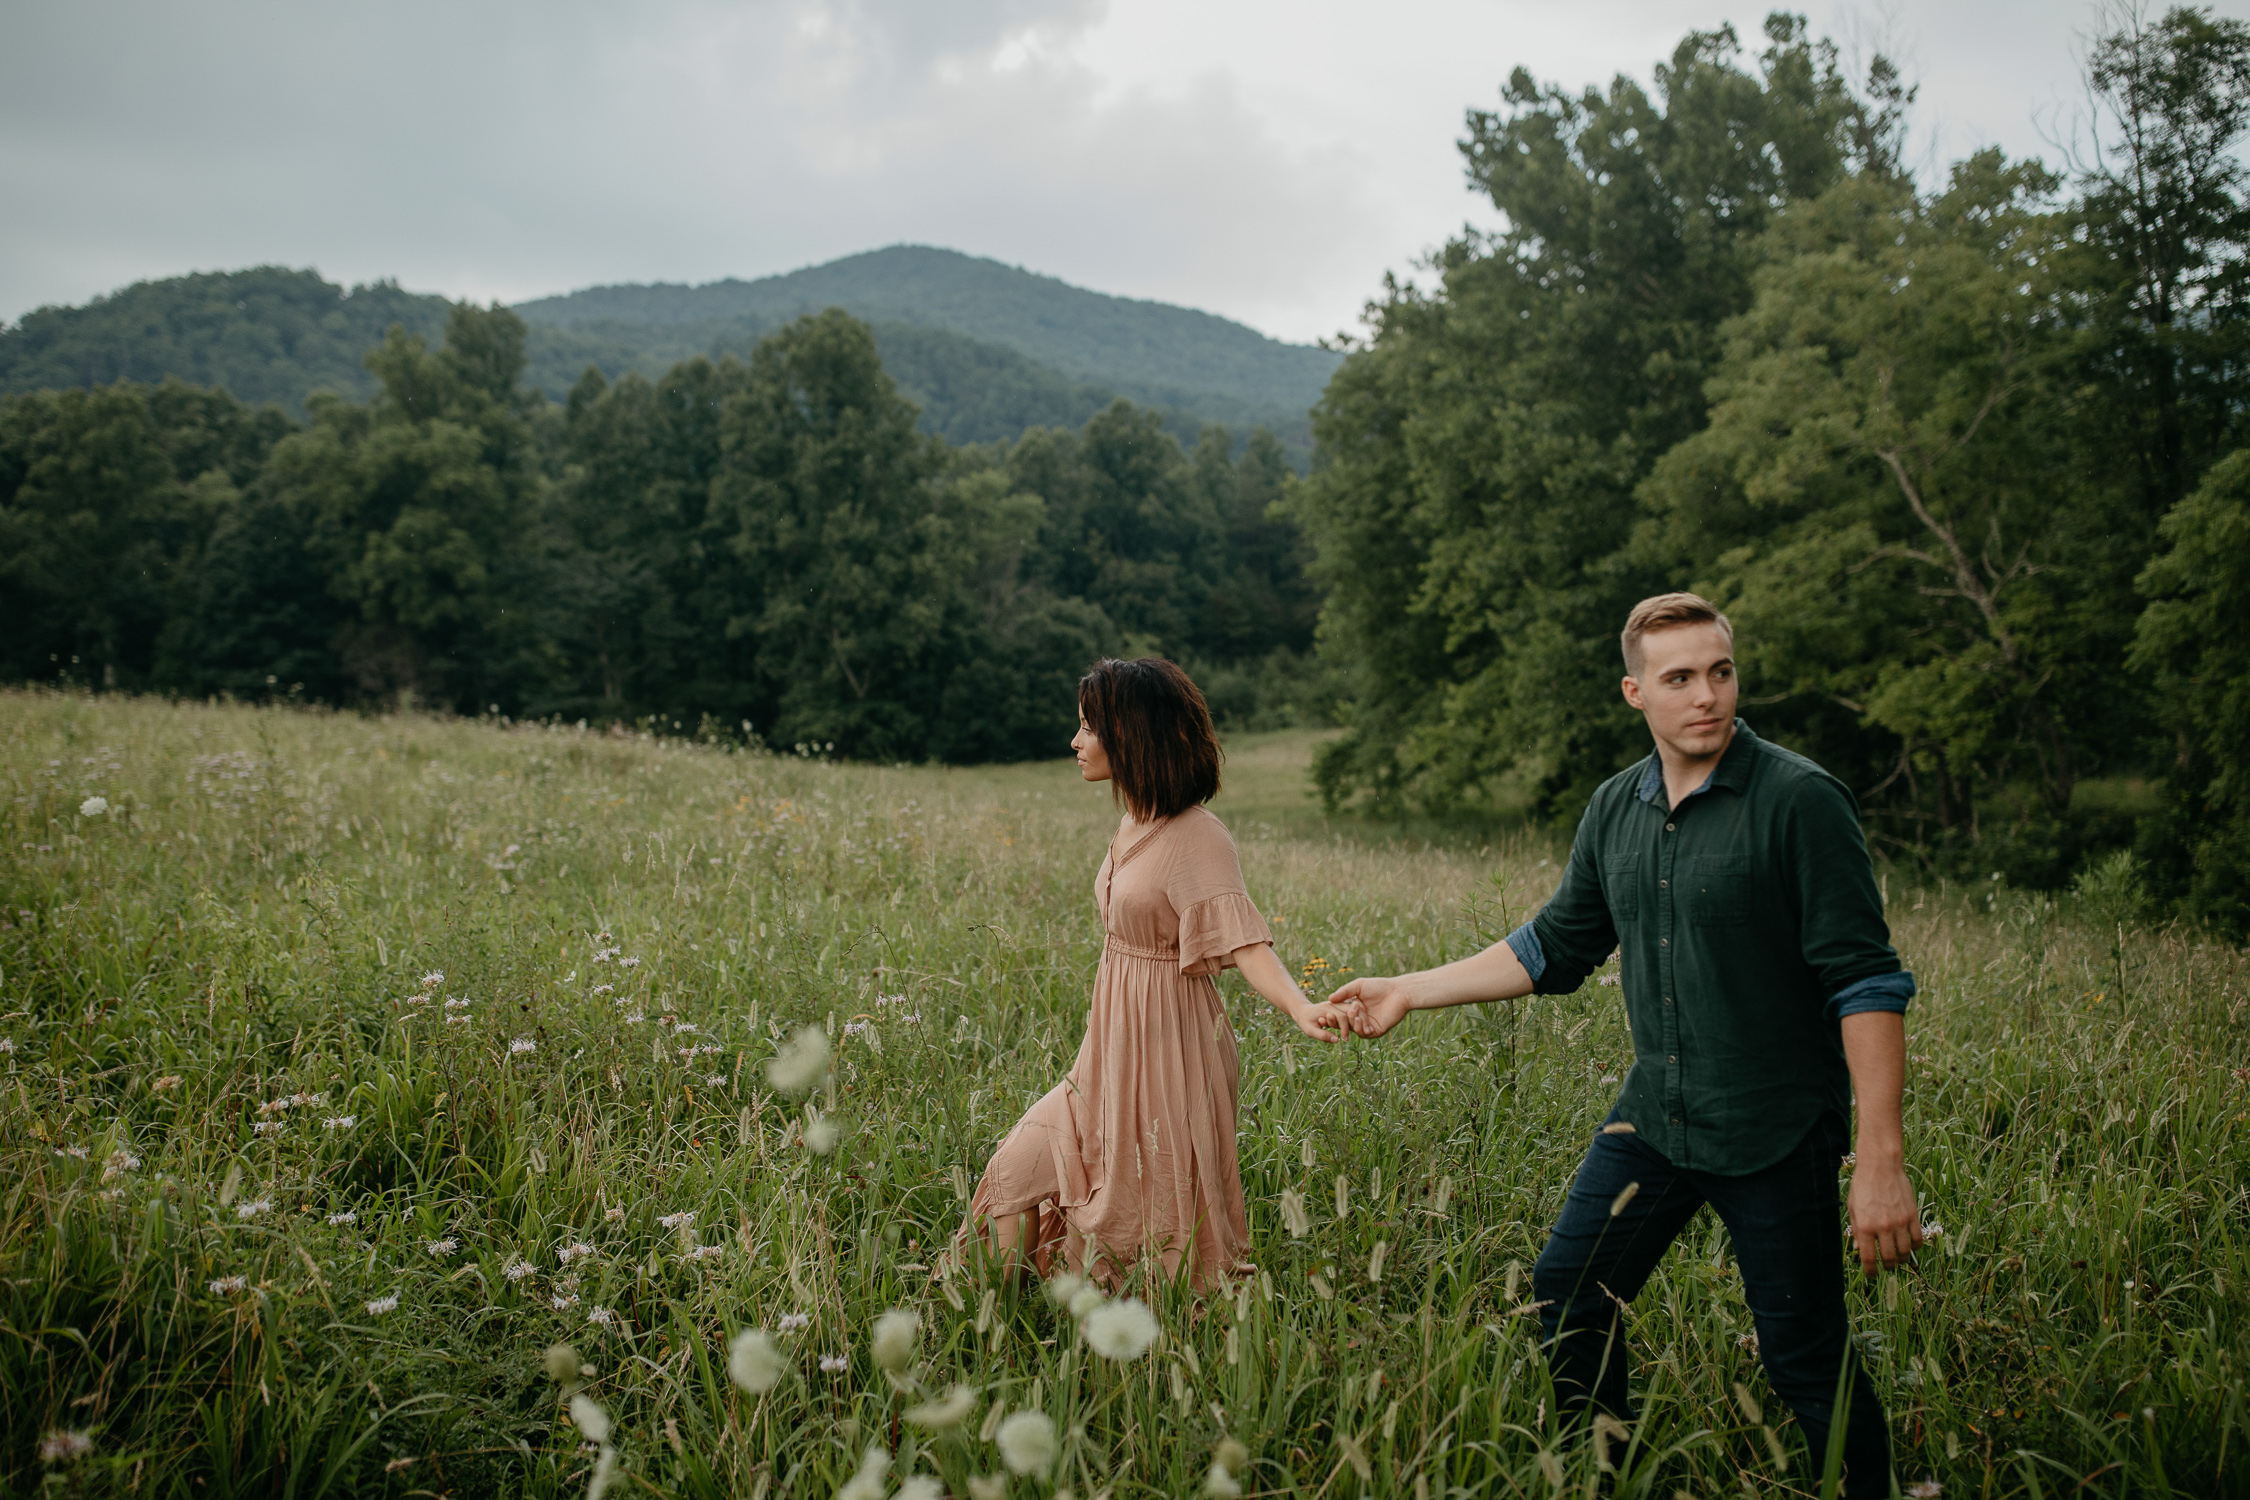 ariannamtorres and isaac engagement session at cades cove smoky mountains elopement-65.jpg